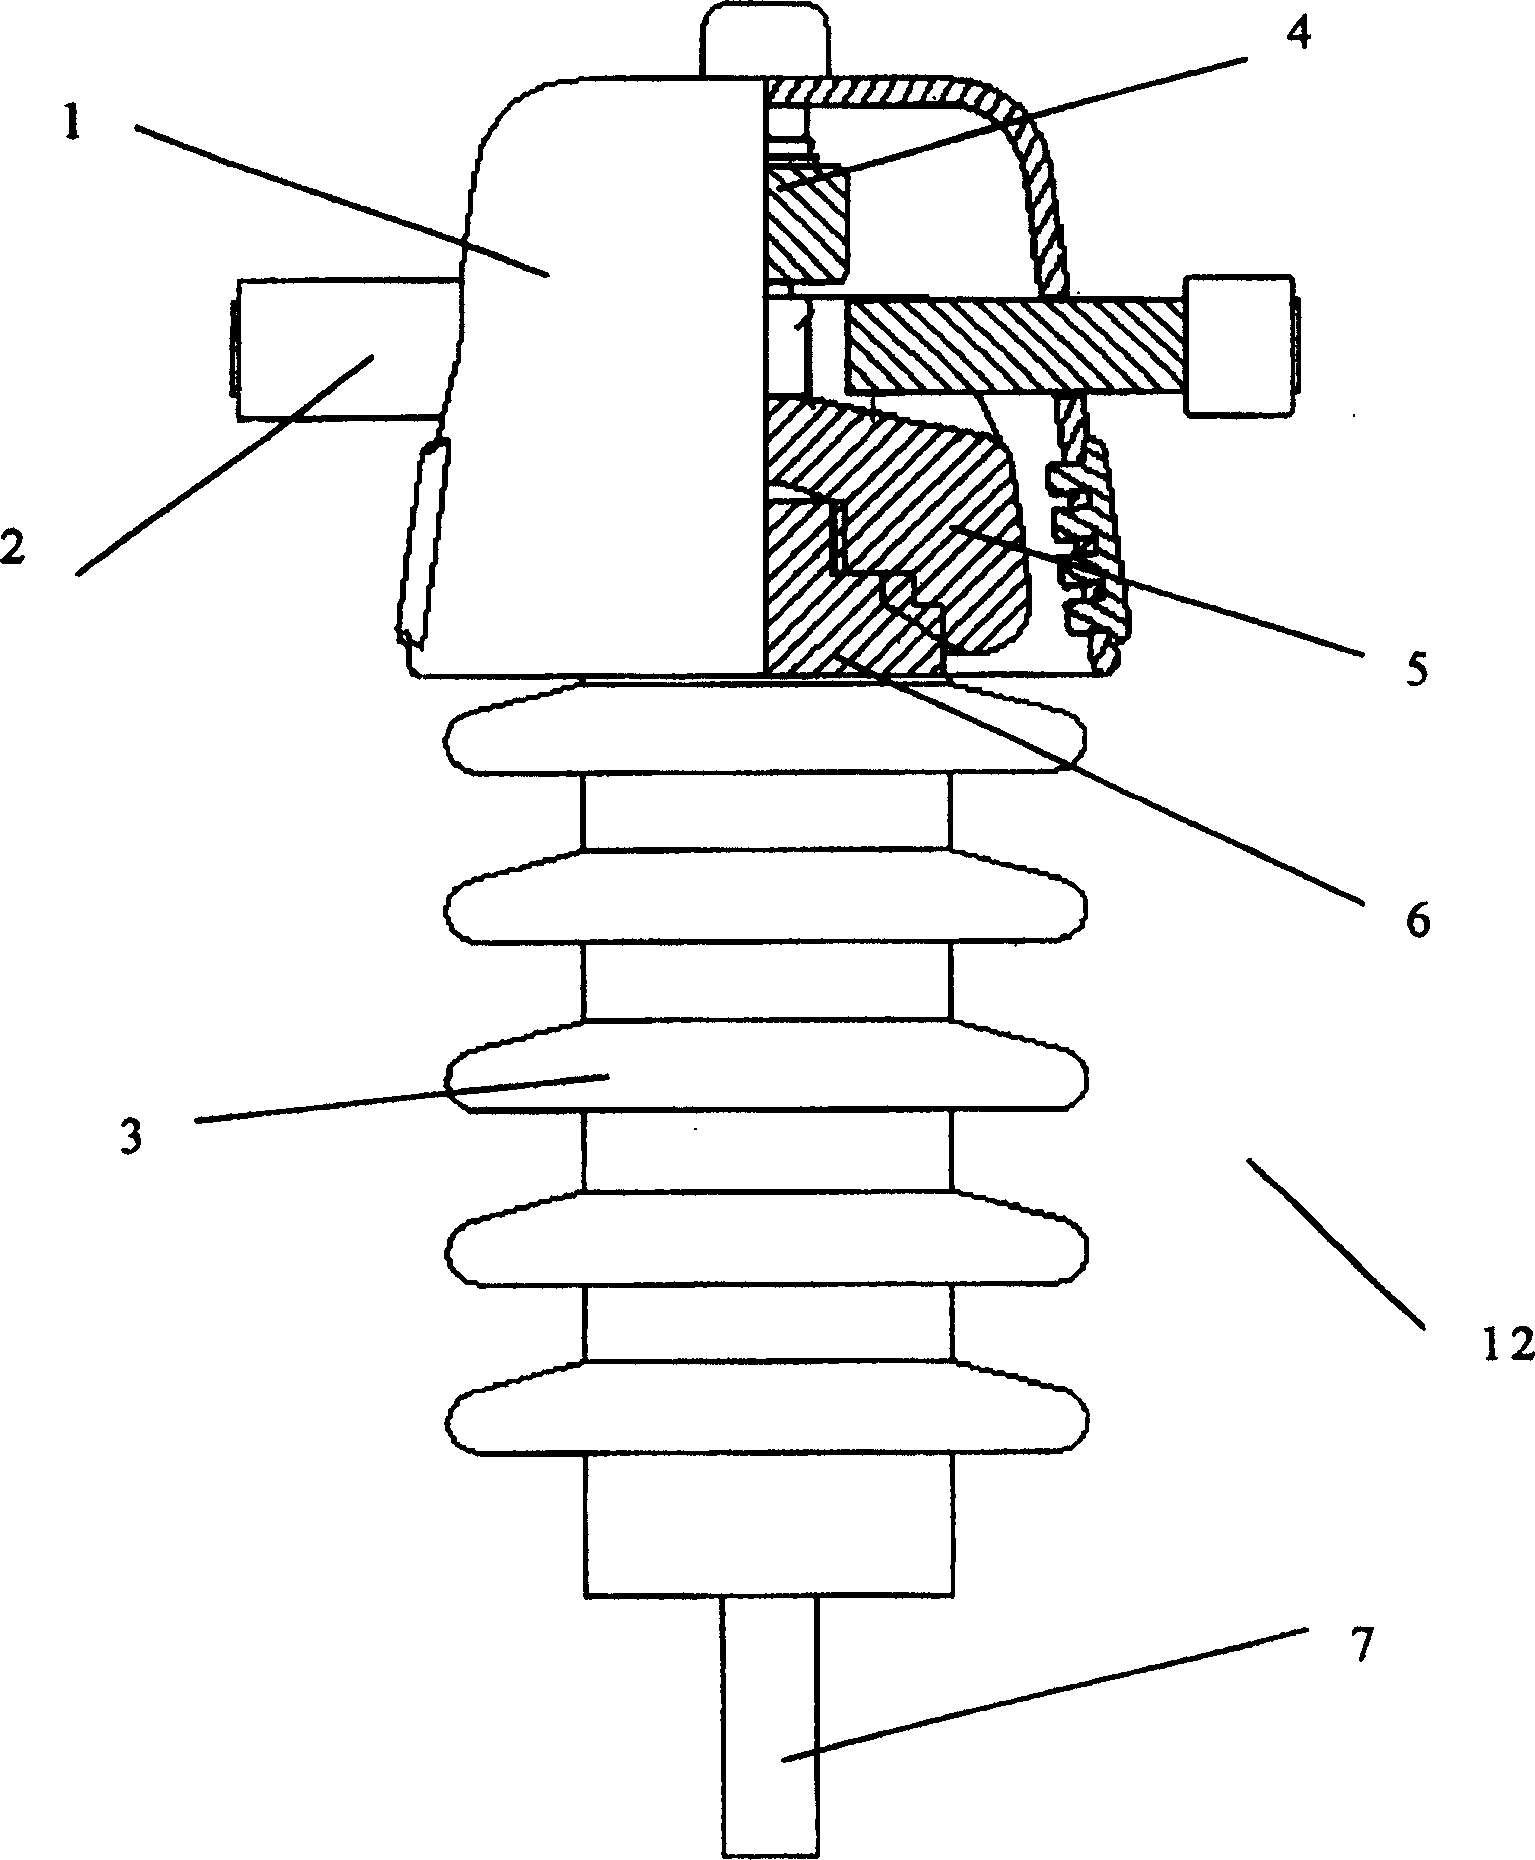 Compound post insulator for preventing broken wire of aerial insulated conductor caused by lightning strike